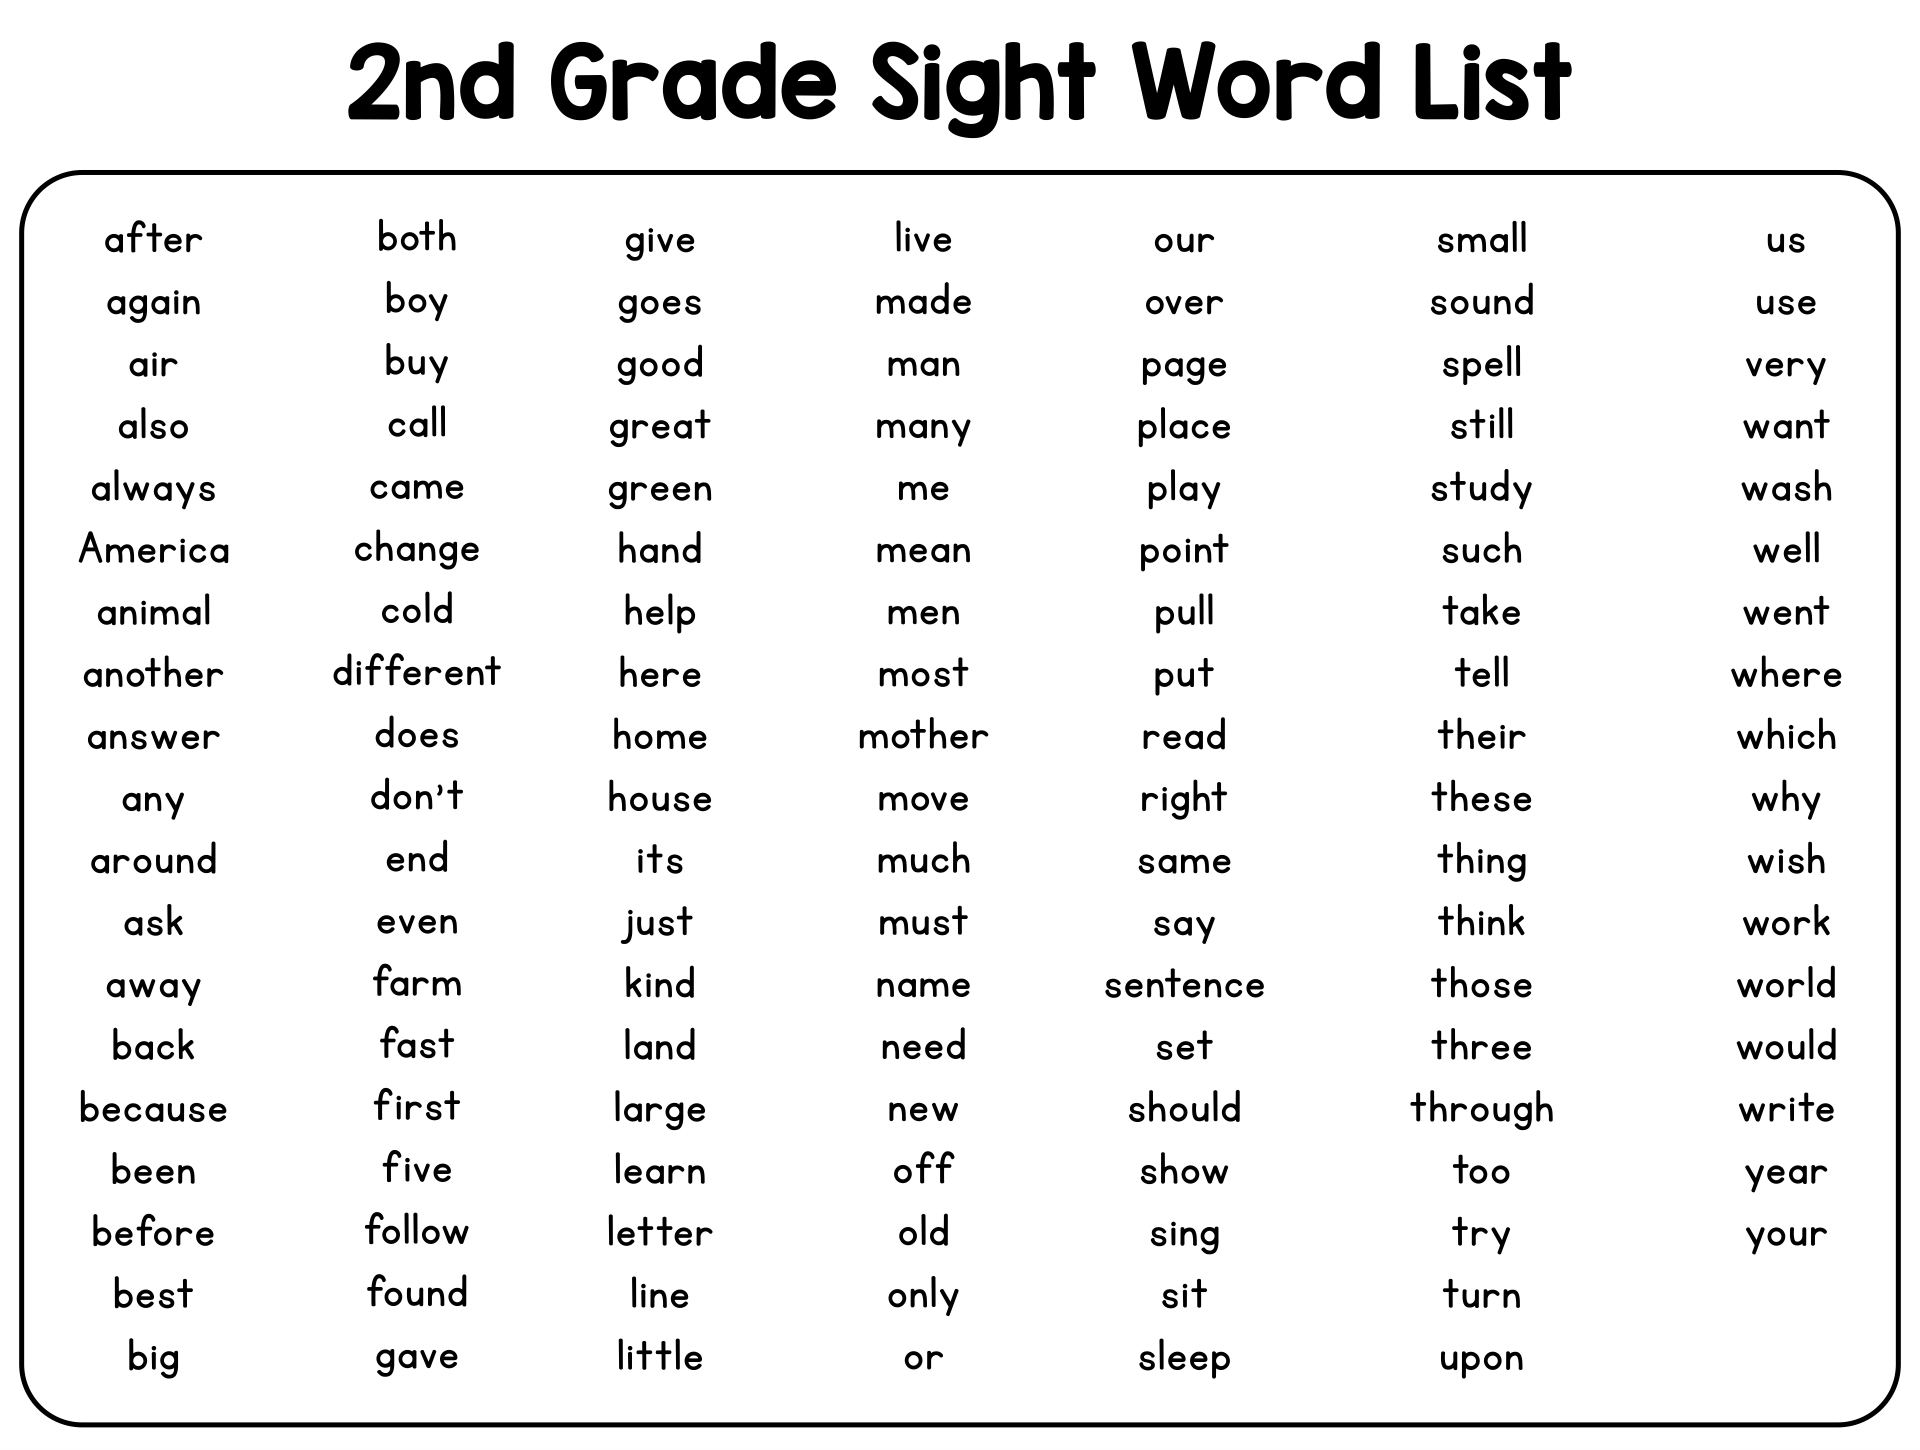 5-best-images-of-second-grade-sight-words-printable-2nd-grade-sight-word-list-second-grade